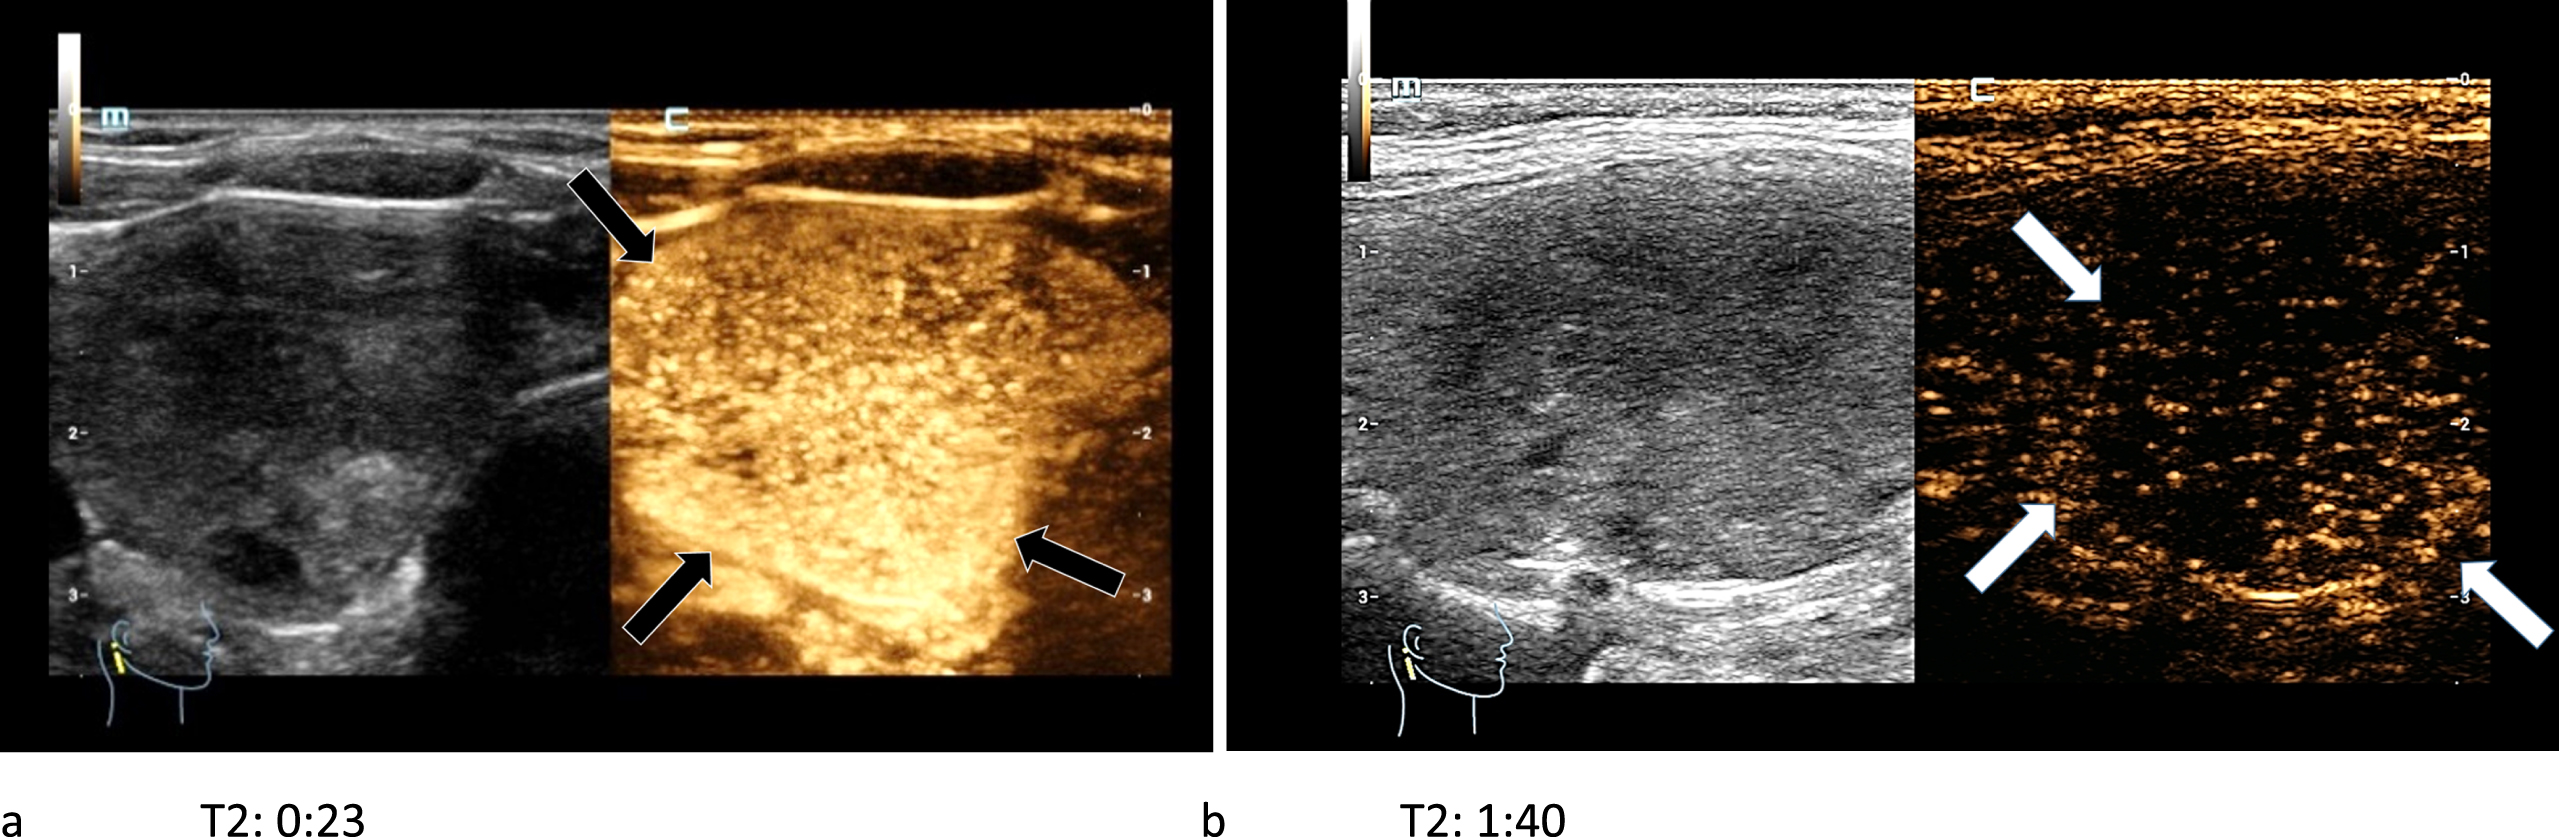 44-year-old patient with histo-pathologically proven papillary thyroid cancer. After the bolus injection of 1.5 ml SonoVue® the CEUS-kinetics of the lesion were documented: an early irregular marginal and central enhancement phenomenon (black arrows) called wash-in (left/a) took place. An early wash-out (white arrows) during the late arterial phase (right/b) was visible.